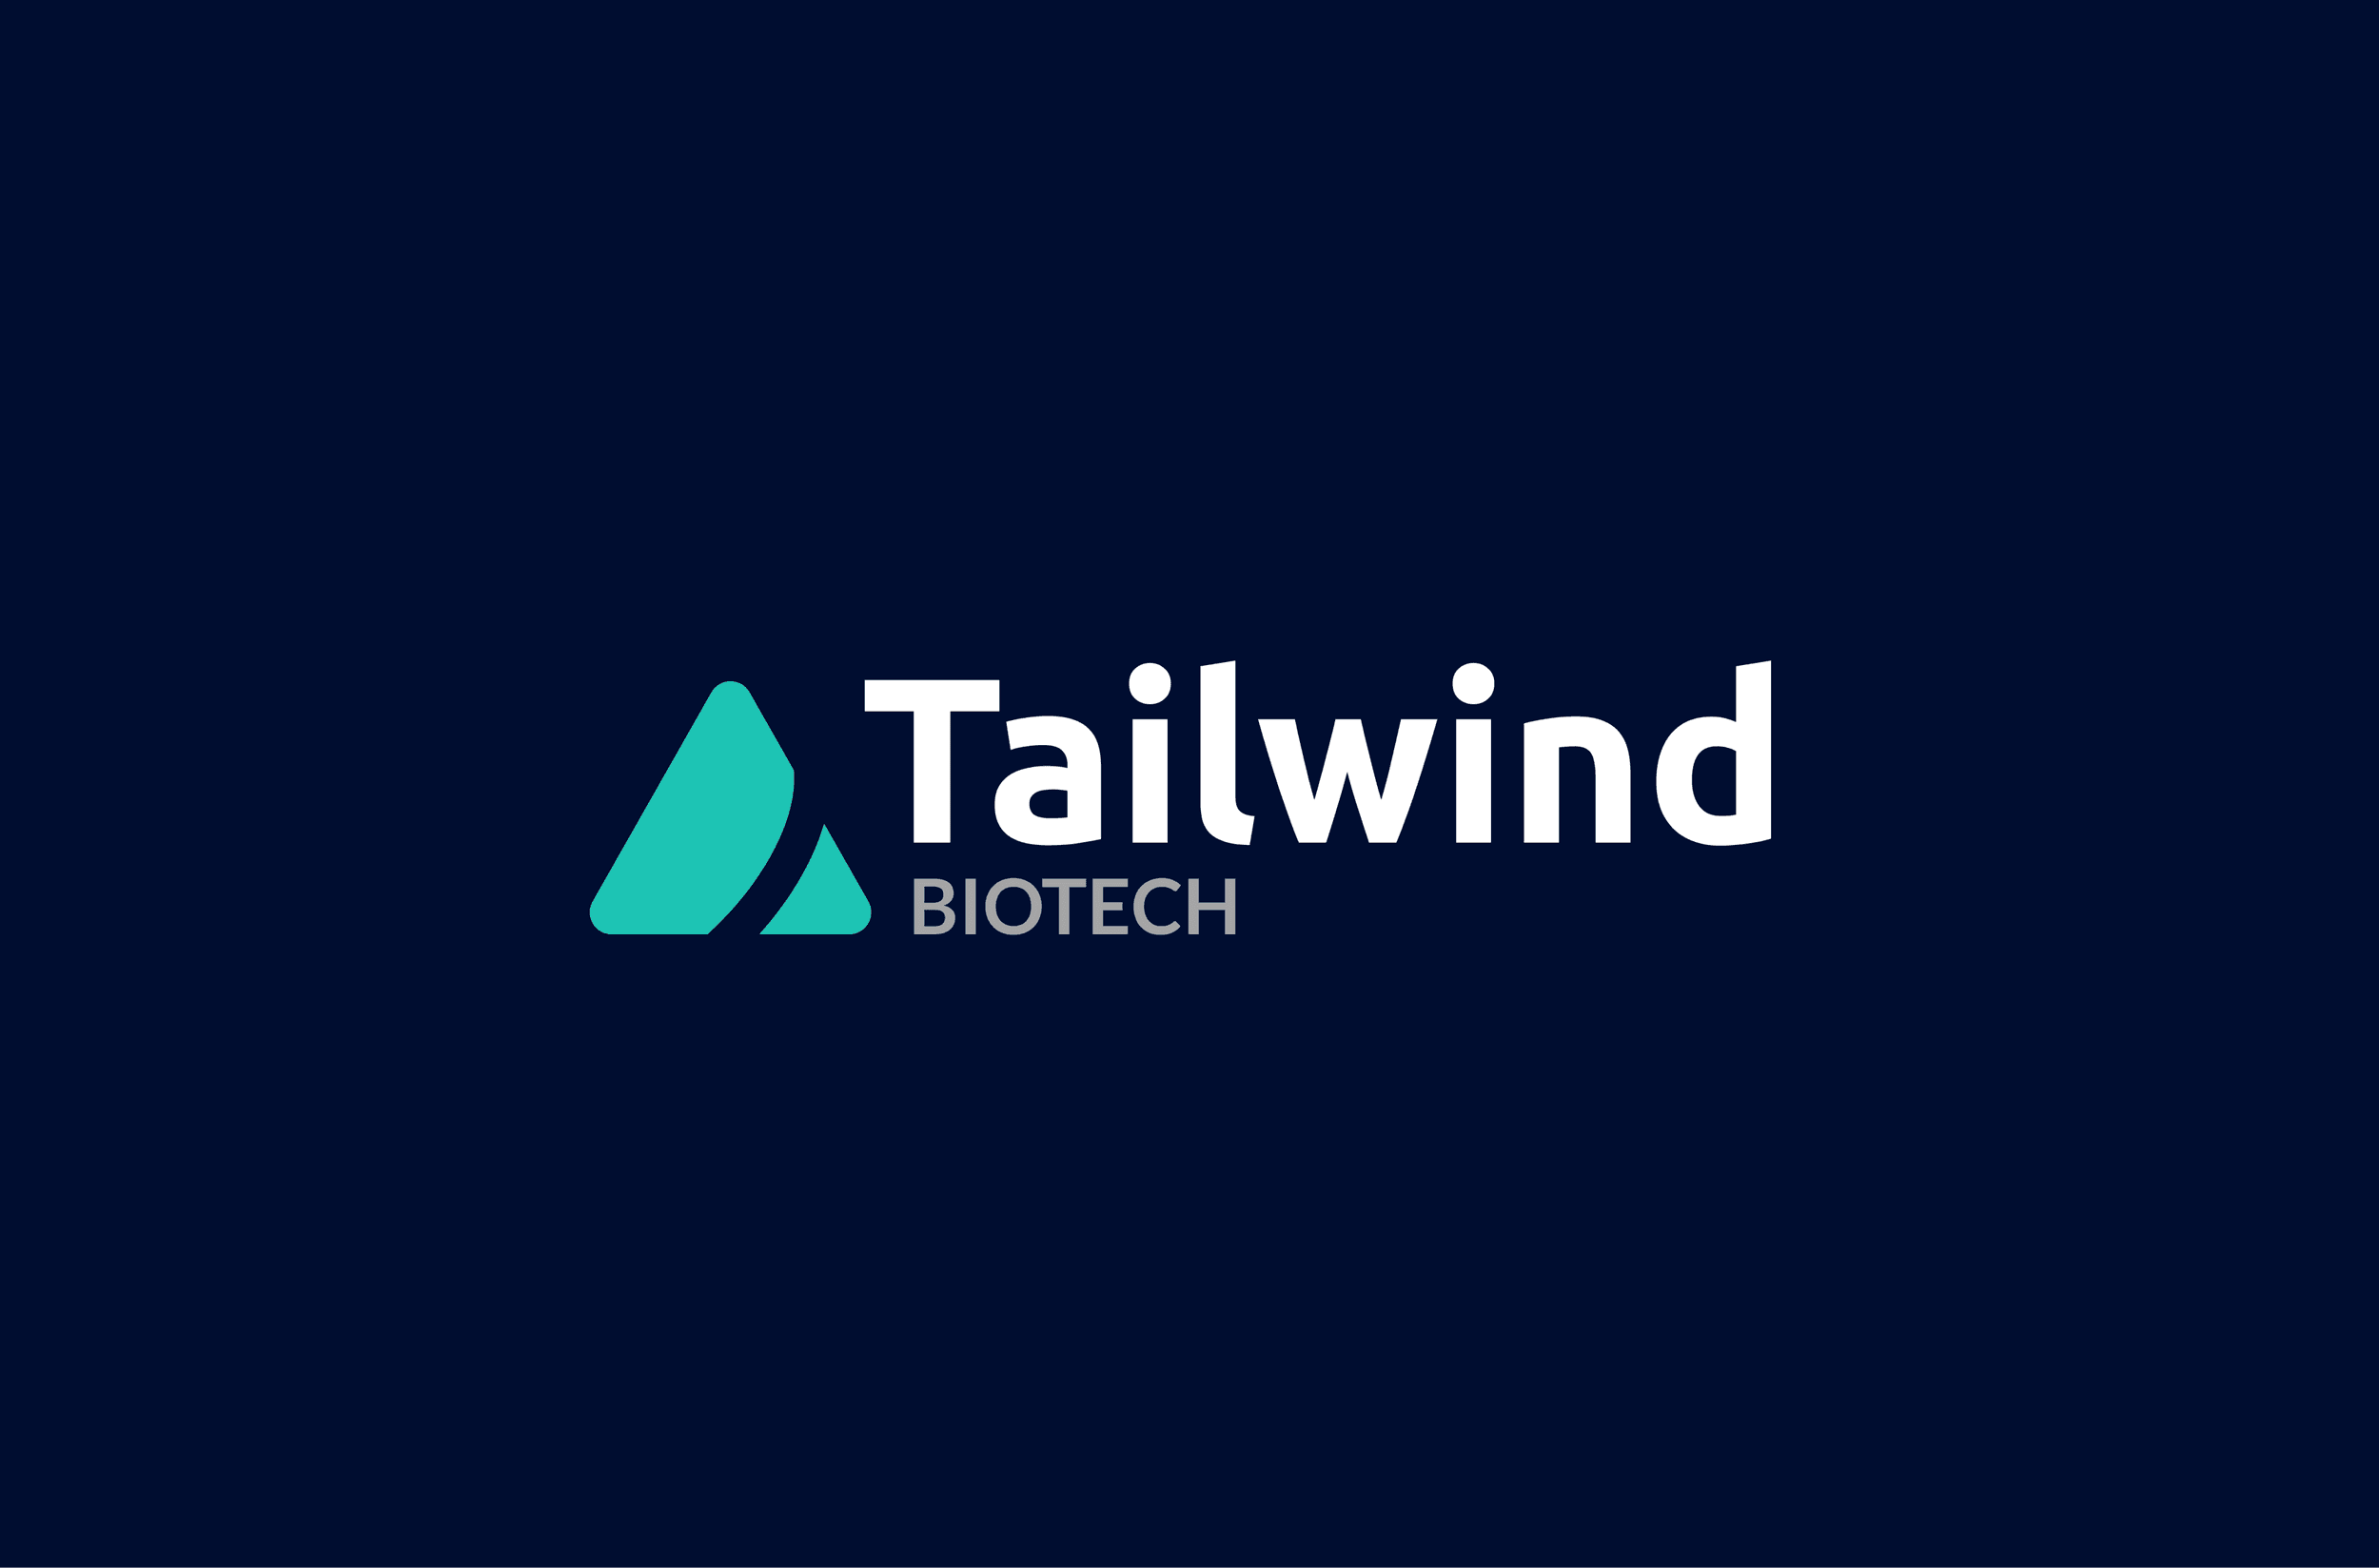 Product Tailwind Biotech - Service offering image